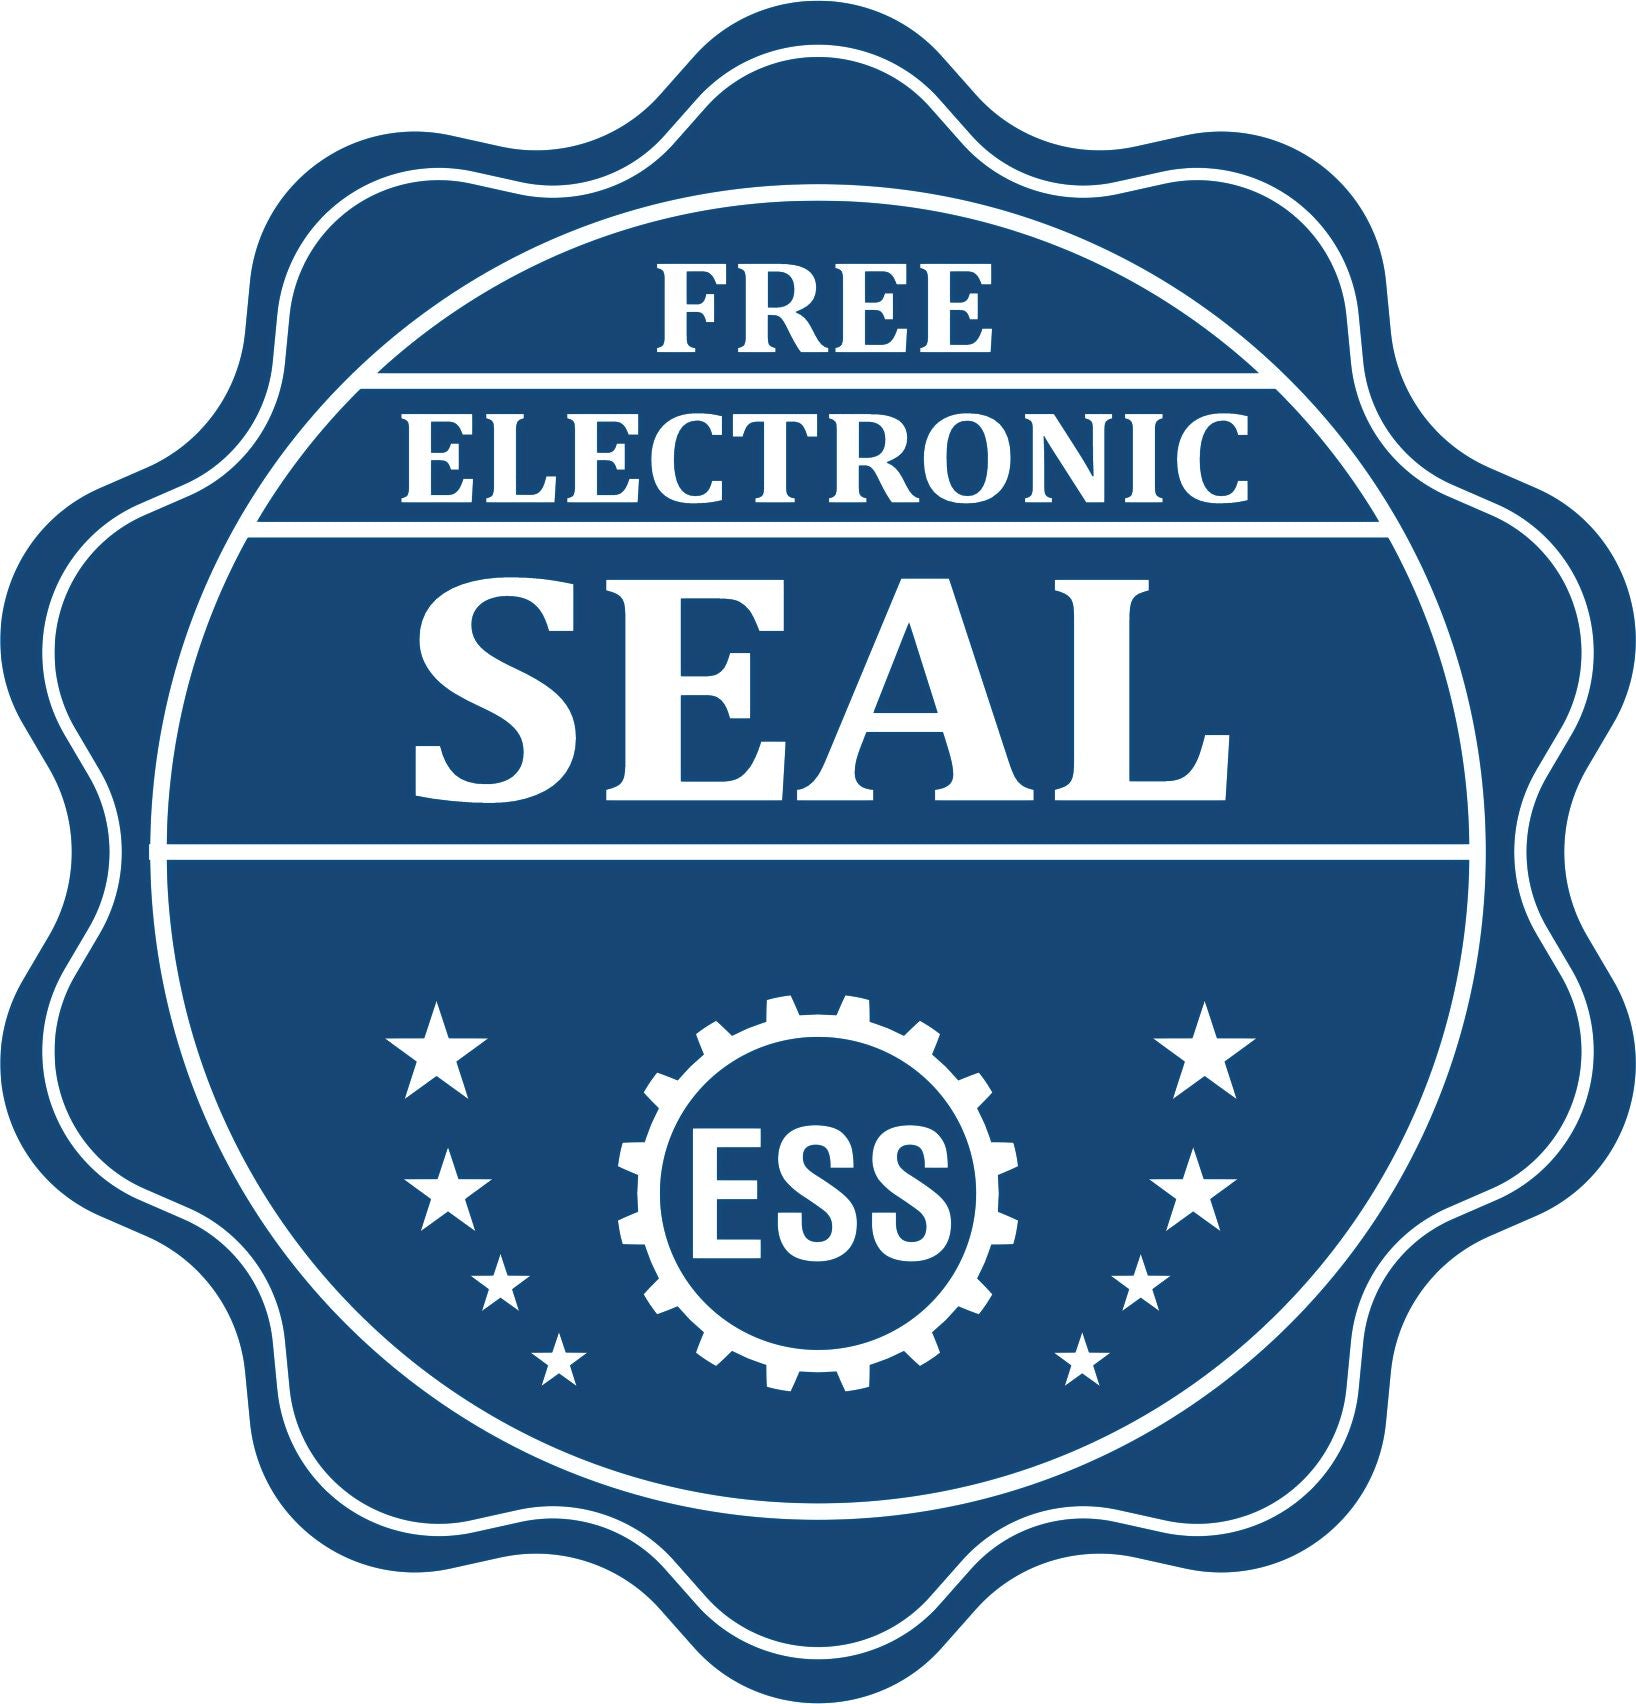 A badge showing a free electronic seal for the Gift Virginia Architect Seal with stars and the ESS gear on the emblem.